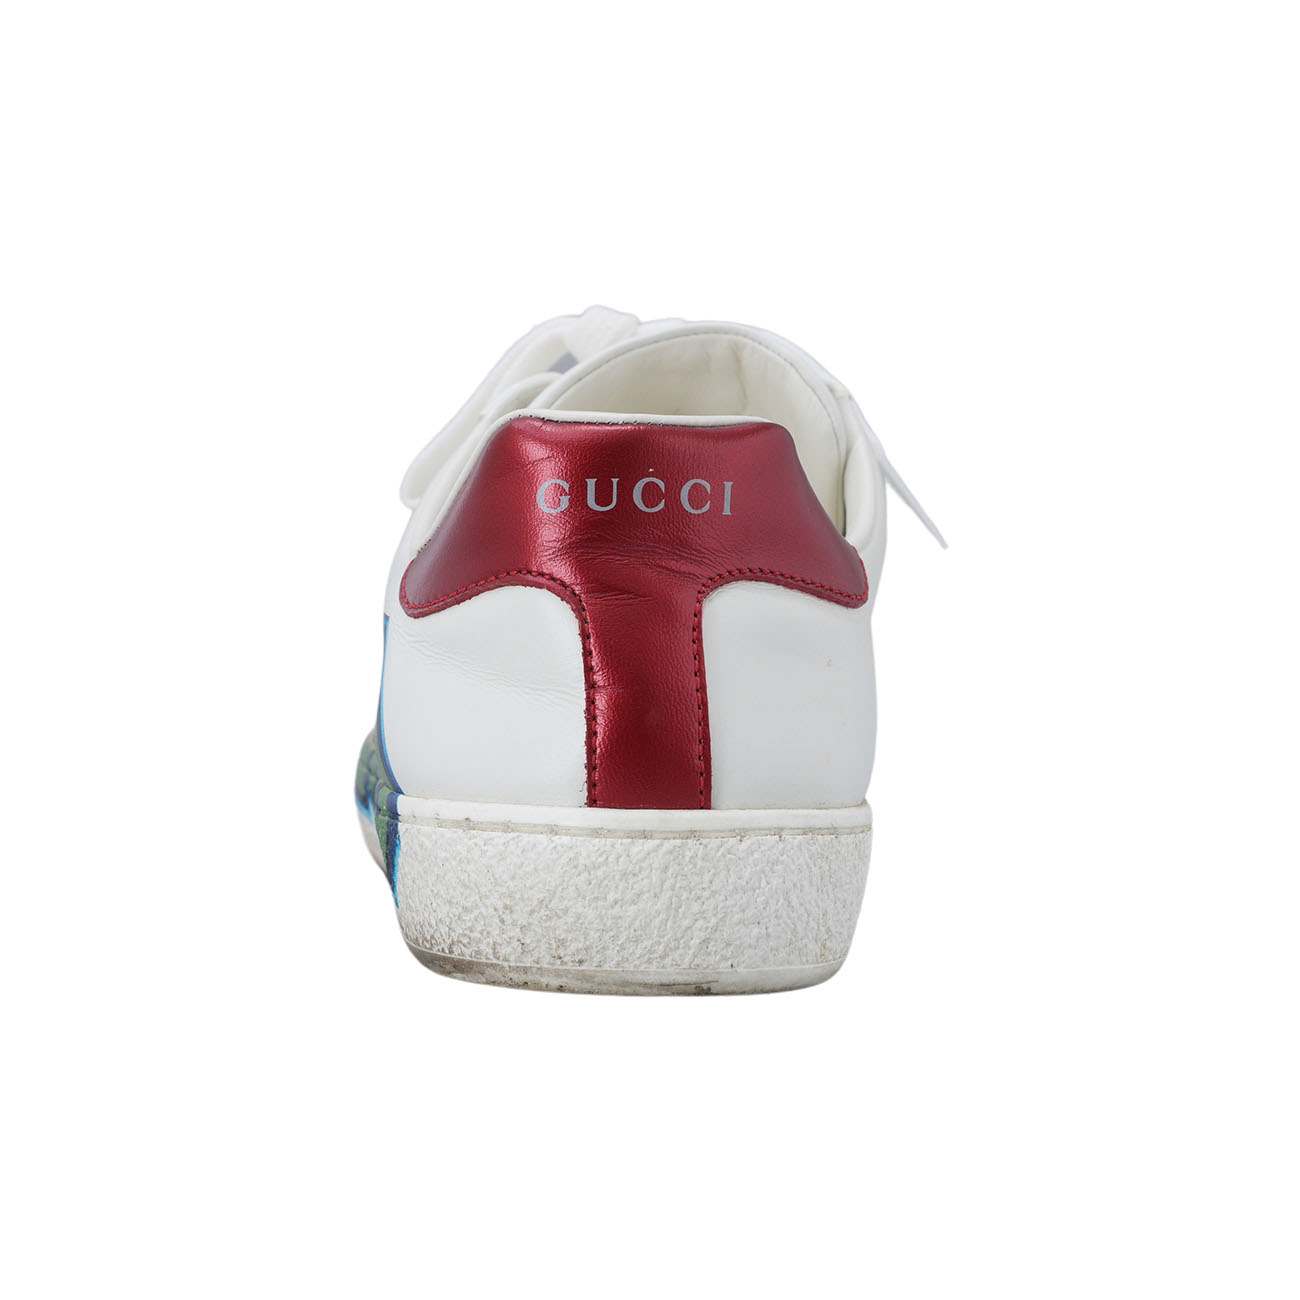 GUCCI(USED)구찌 548758 LOVED 로고 스니커즈